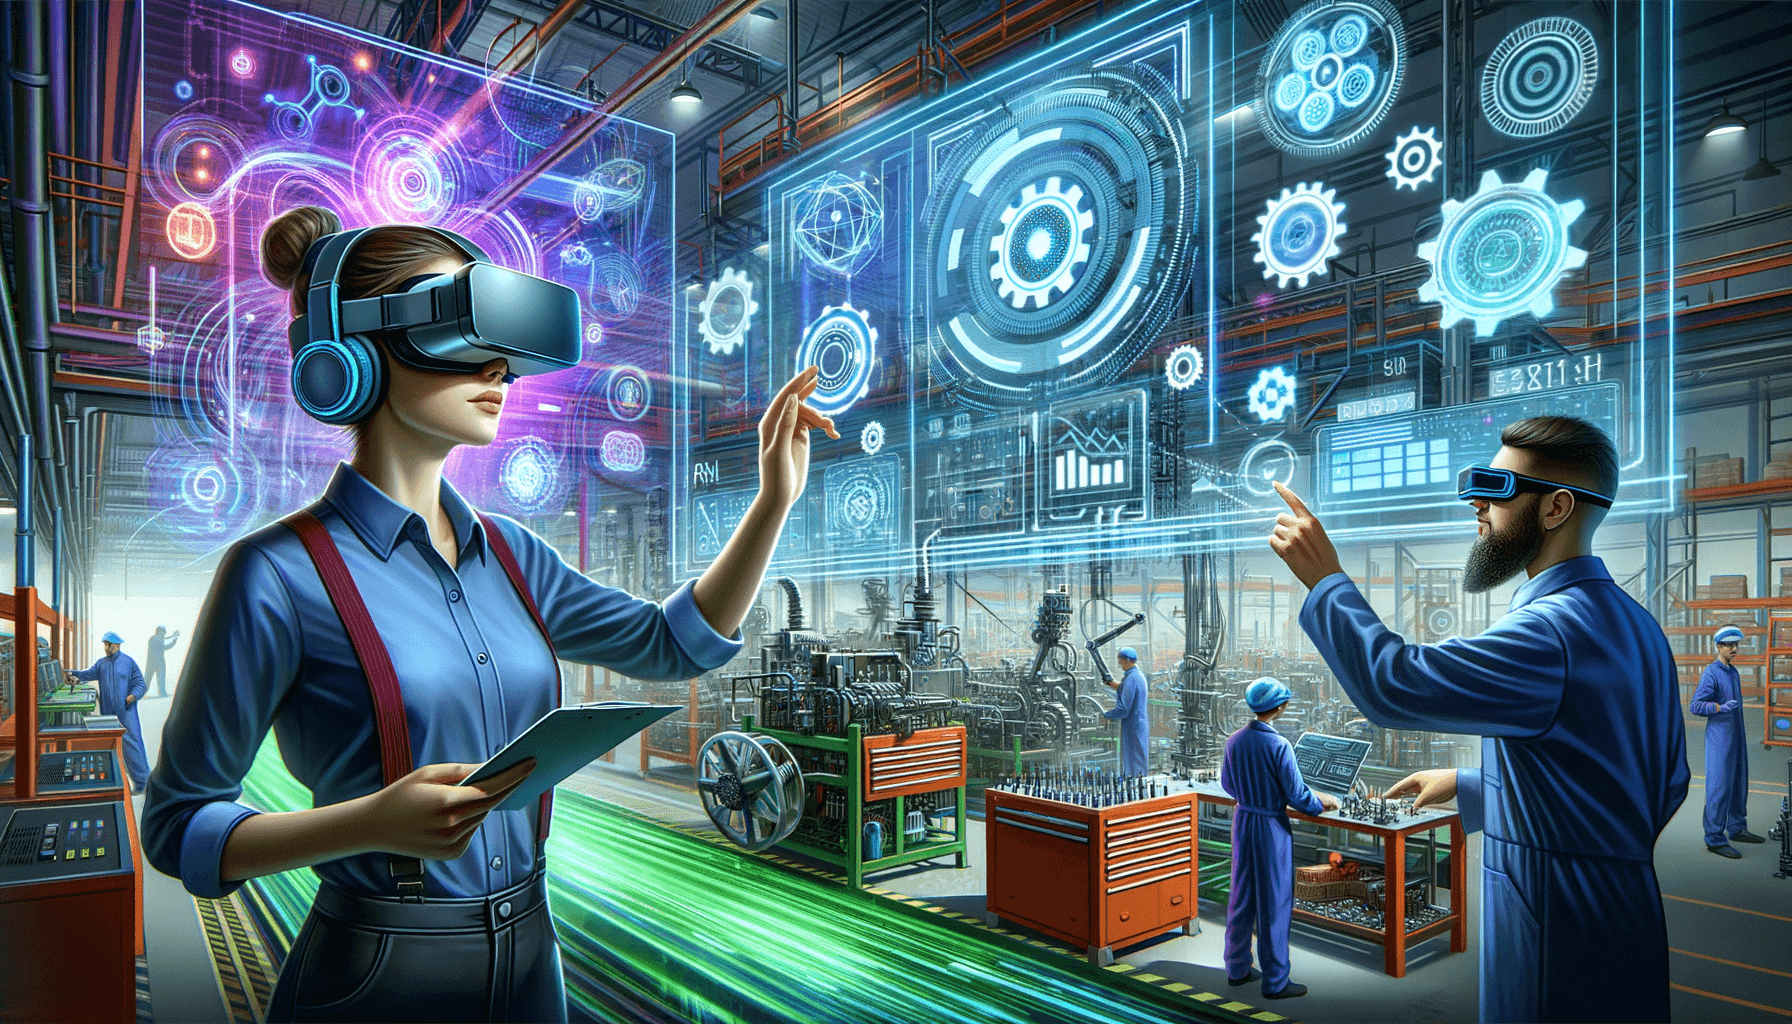 "Revolutionize your workforce with AR and VR training technologies - the future of effective and risk-free learning in manufacturing"